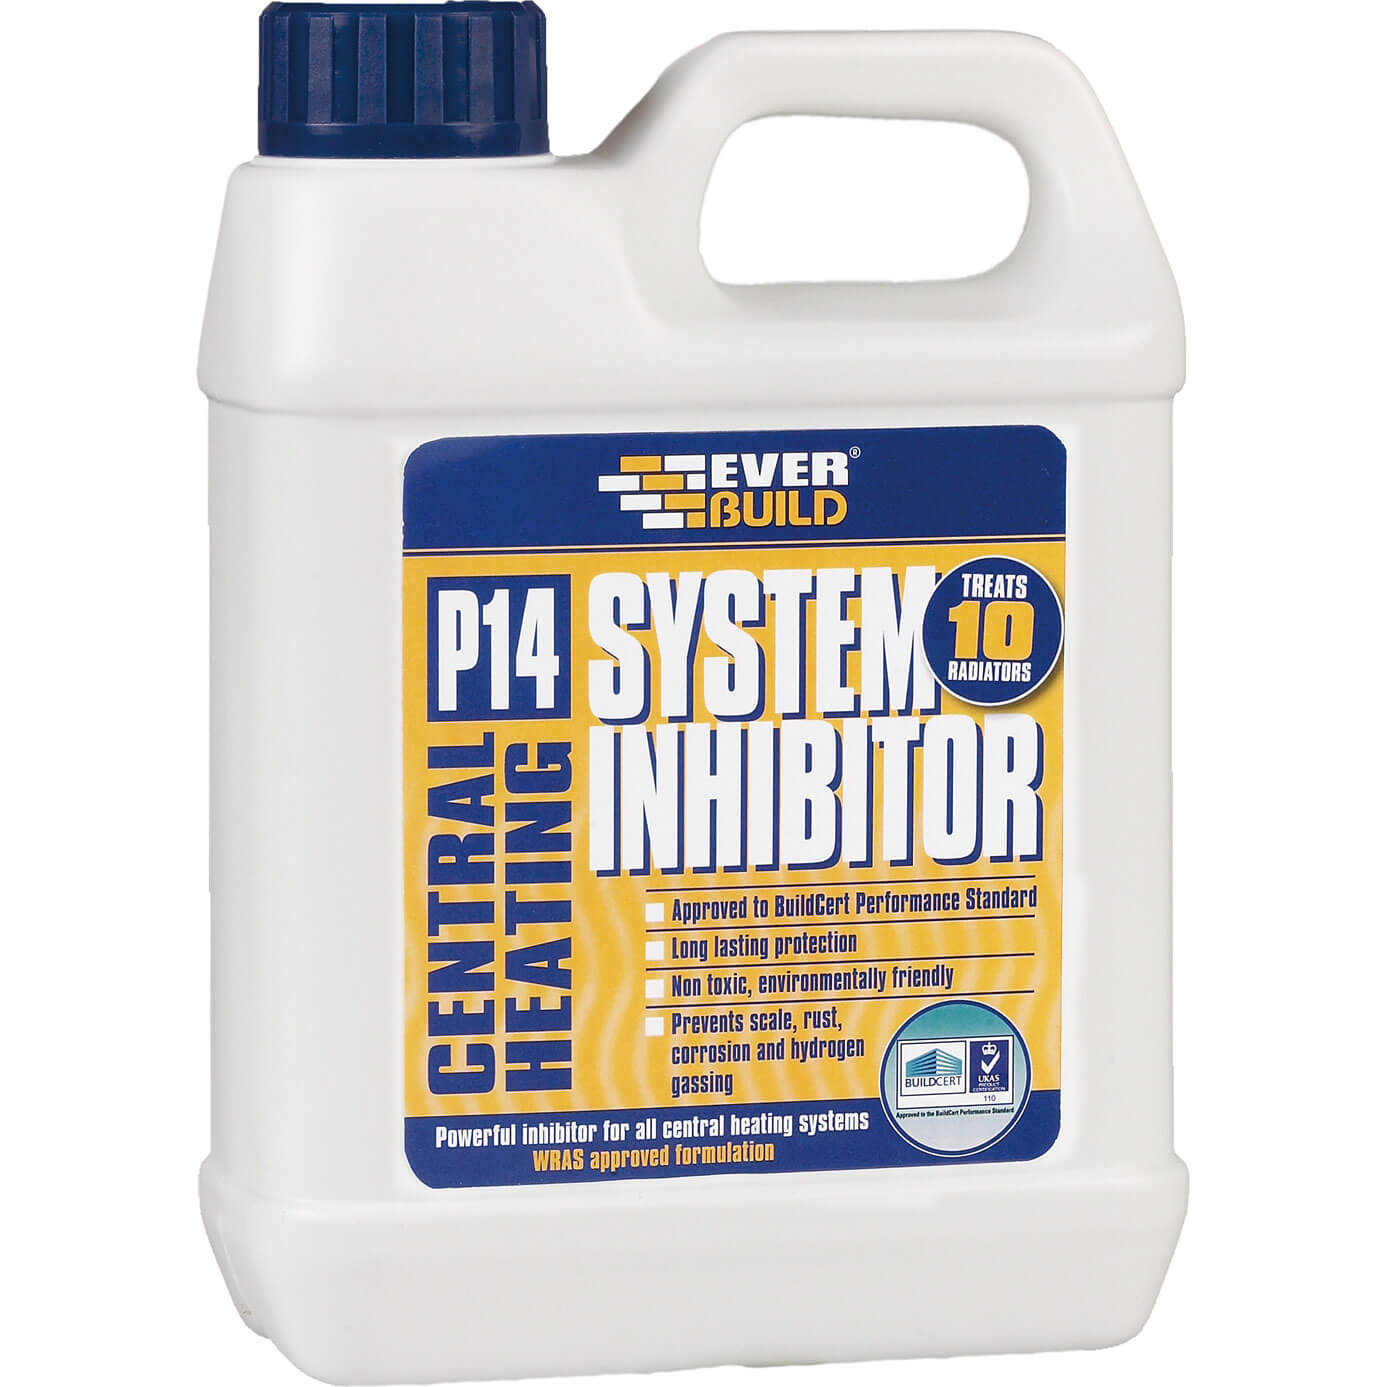 Image of Everbuild P14 Central Heating System Inhibitor 1l